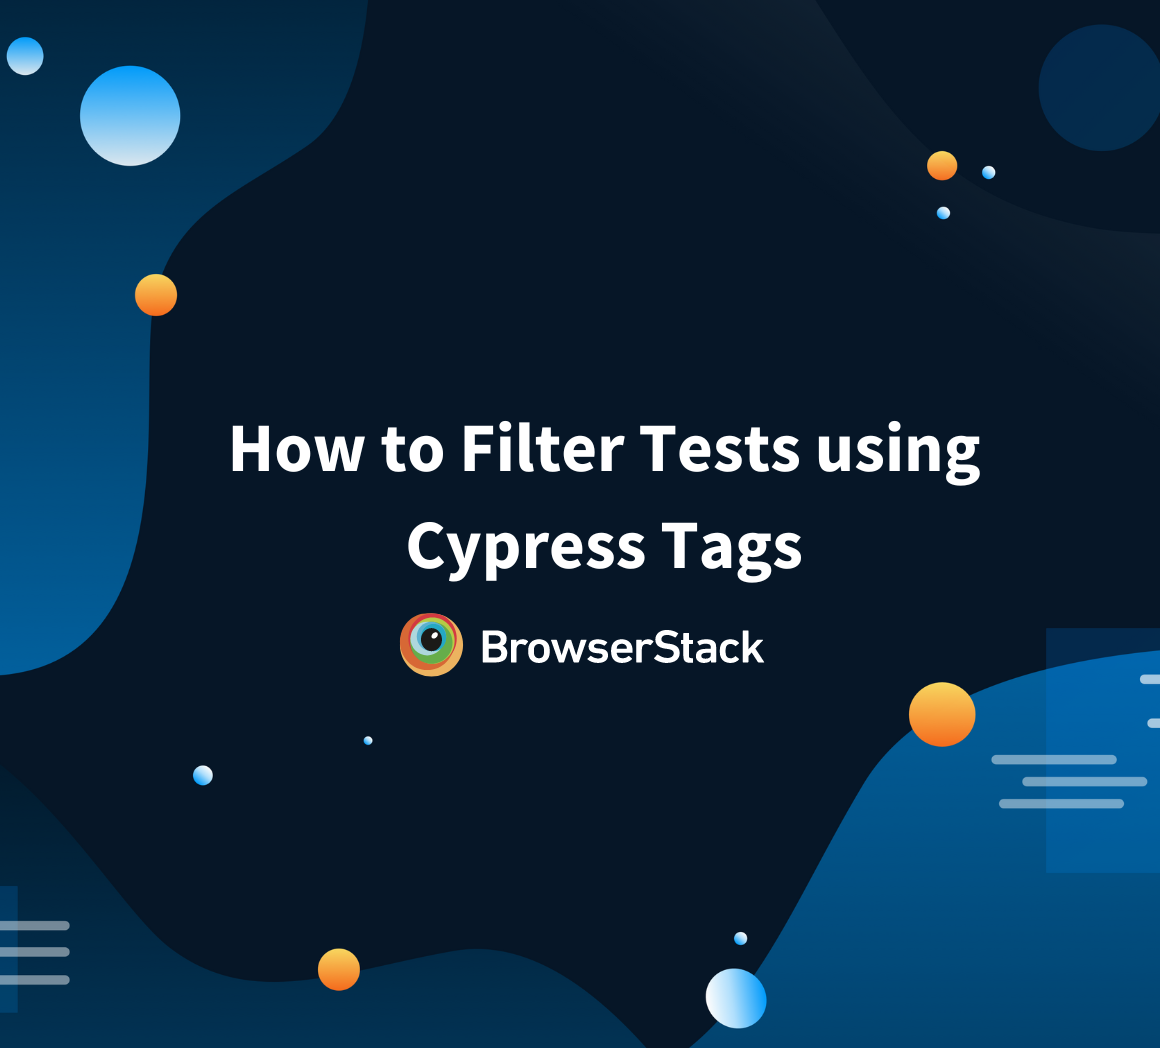 How to Filter Tests using Cypress Tags